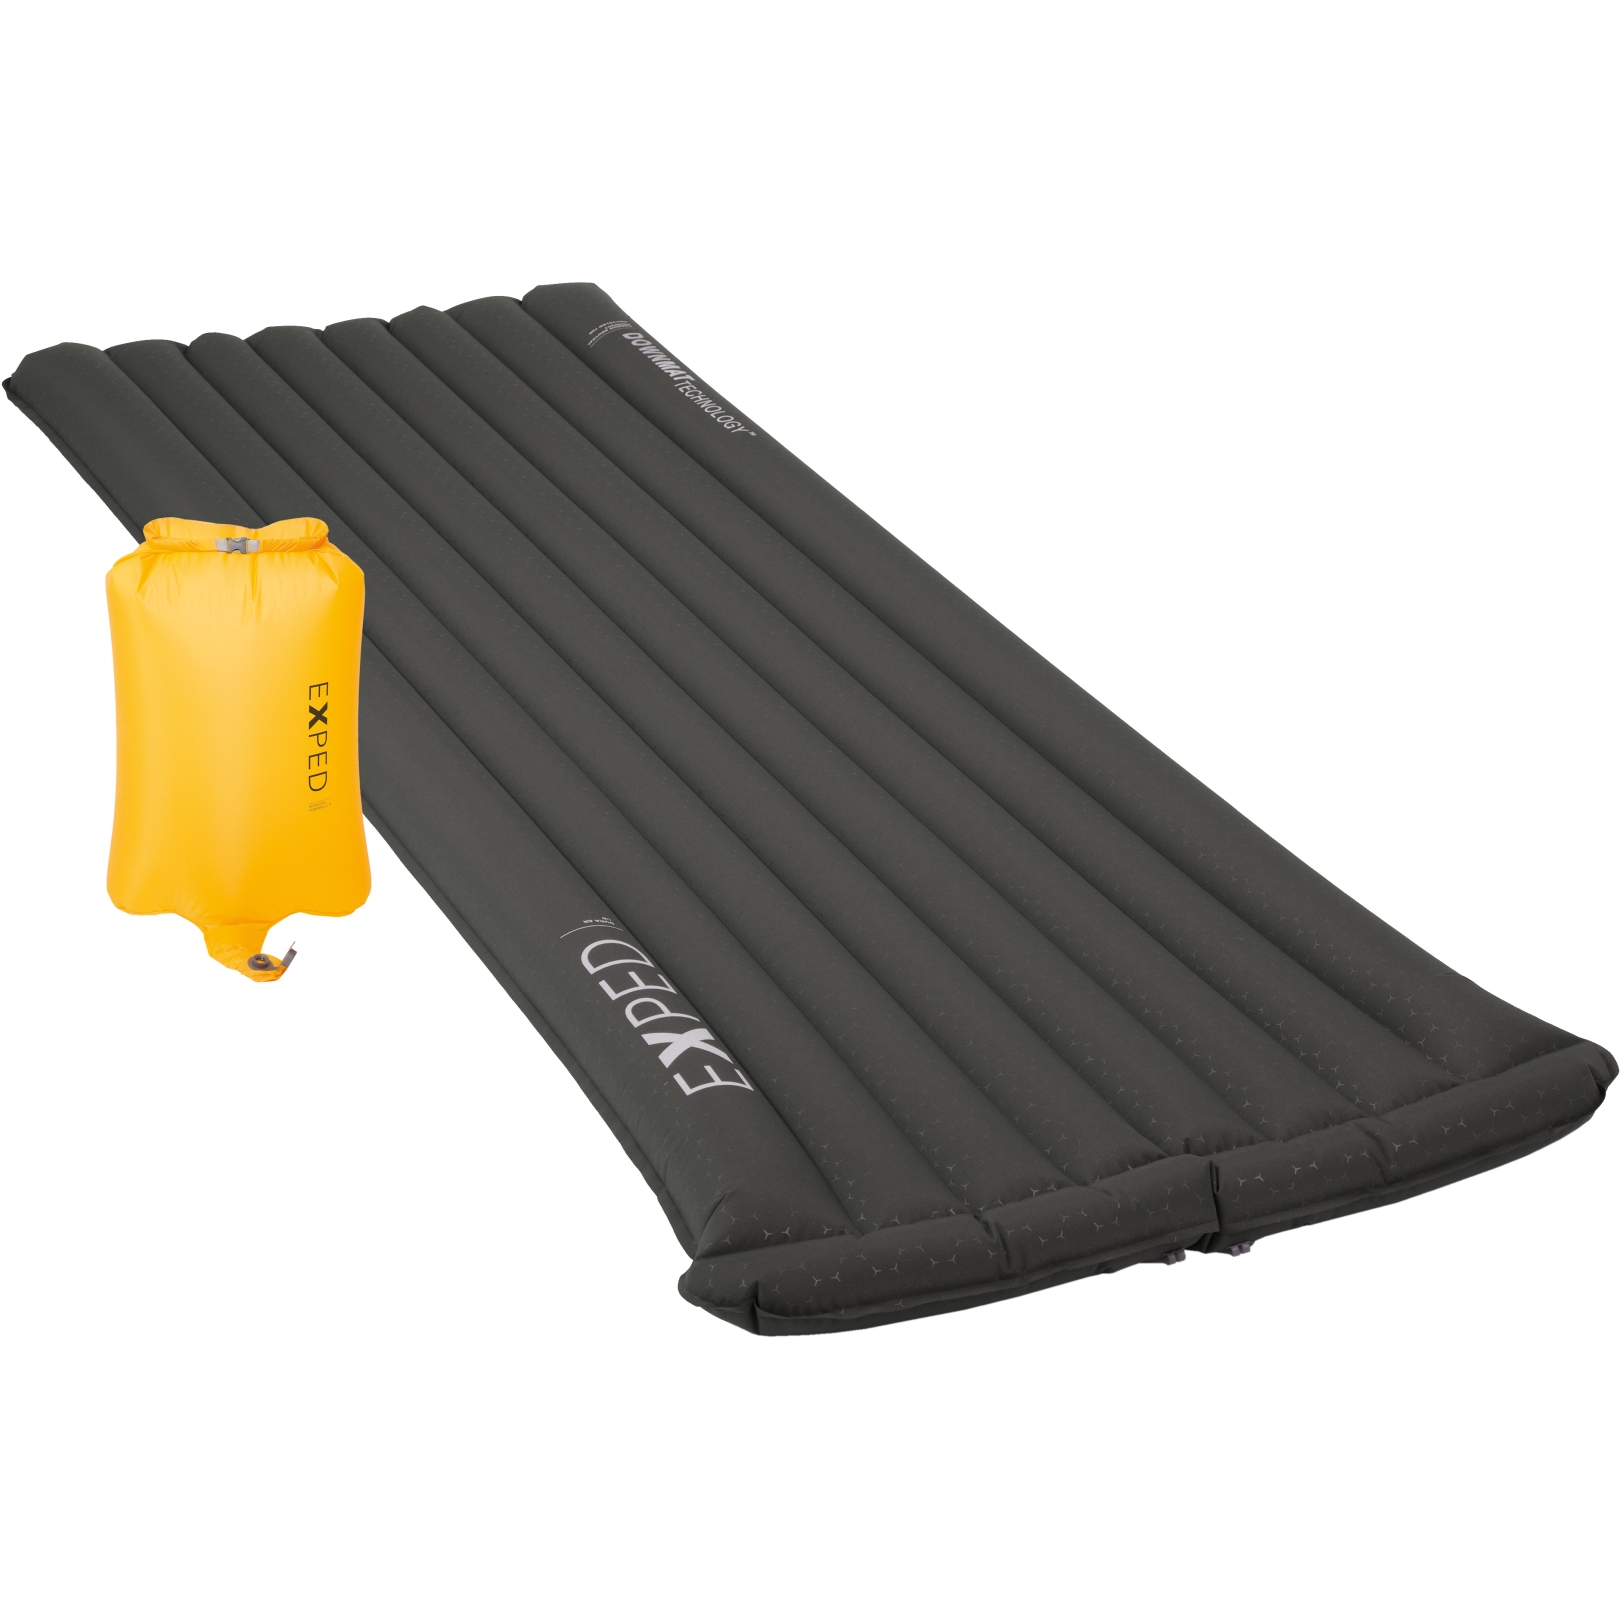 Picture of Exped Dura 6R Sleeping Mat - LW - charcoal